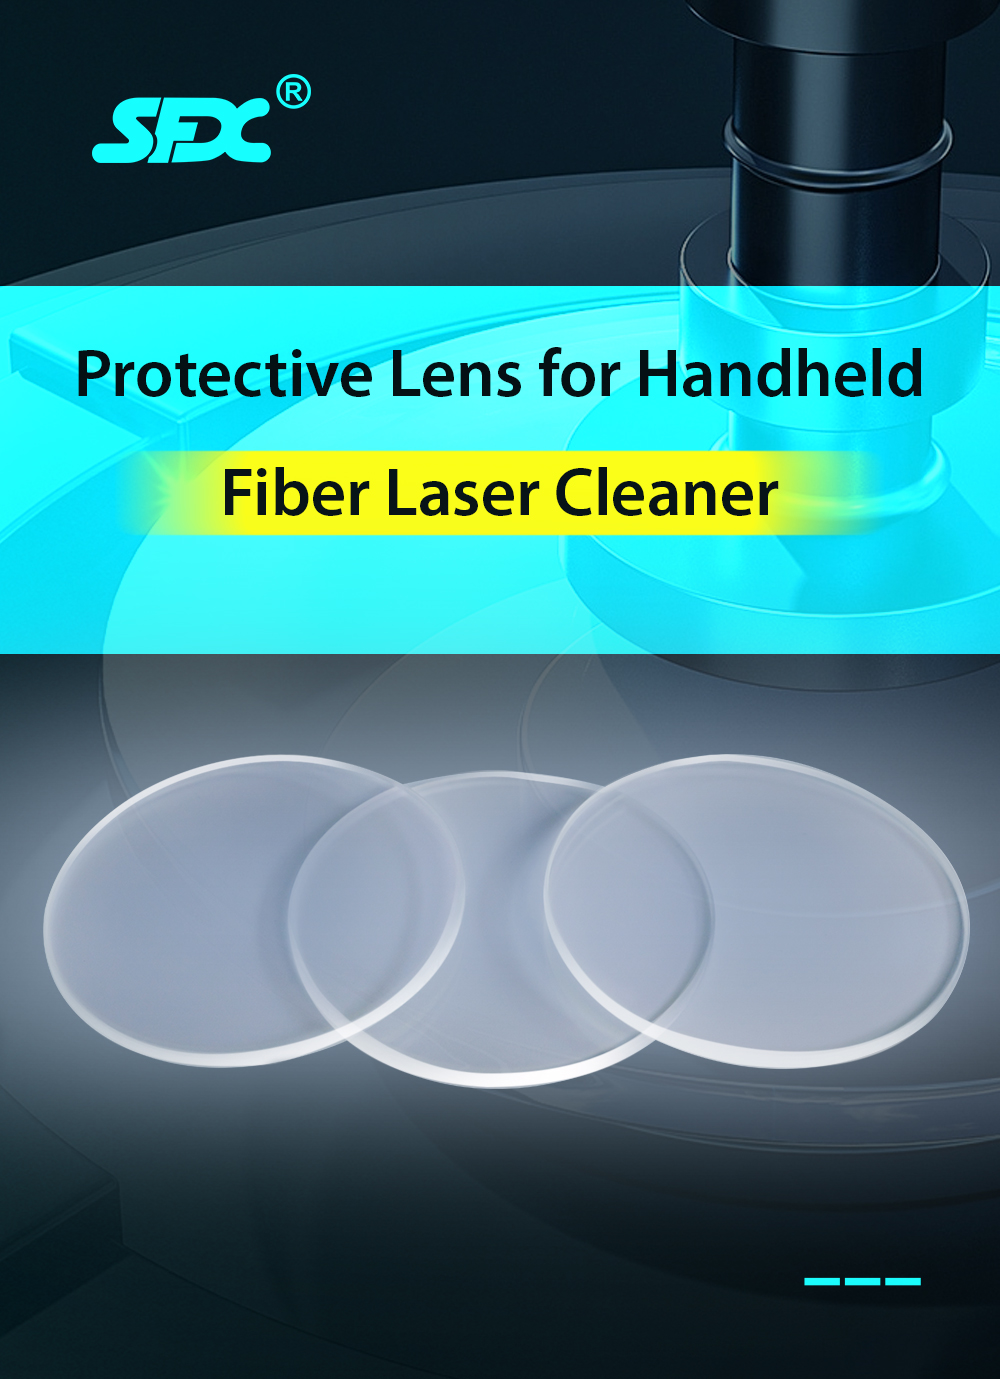 SFX Laser Protective Lenses Special for SFX 3000W Laser Cleaning Machine 3pcs /10 pcs Package Available SFX Laser 3 pcs/ 10 pcs Laser Protective Lenses for SFX Handheld 1000w/1500w/2000w Laser Cleaning Machine SFX Laser Protective Lenses,sfx handheld laser cleaning machine,1000w rust laser cleaner,1500w laser cleaner,2000w laser cleaner